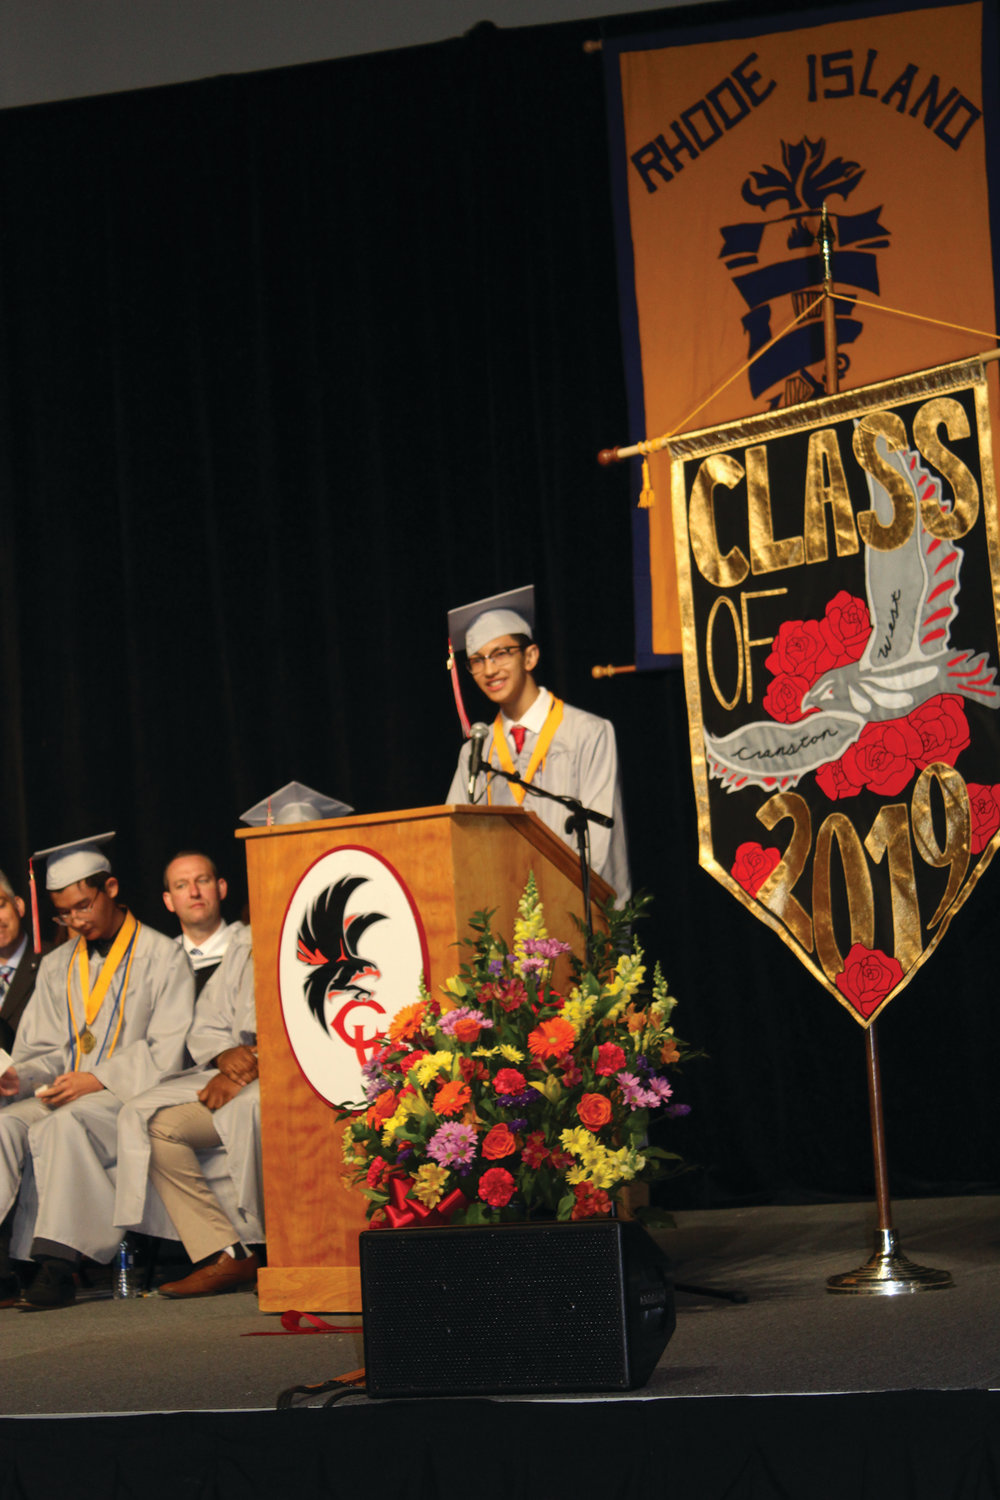 INSPIRED AND INSPIRING: Valedictorian Virak Pond-Tor spoke about how participating in a school sport helped build his character, and of how his parents and others have inspired him.